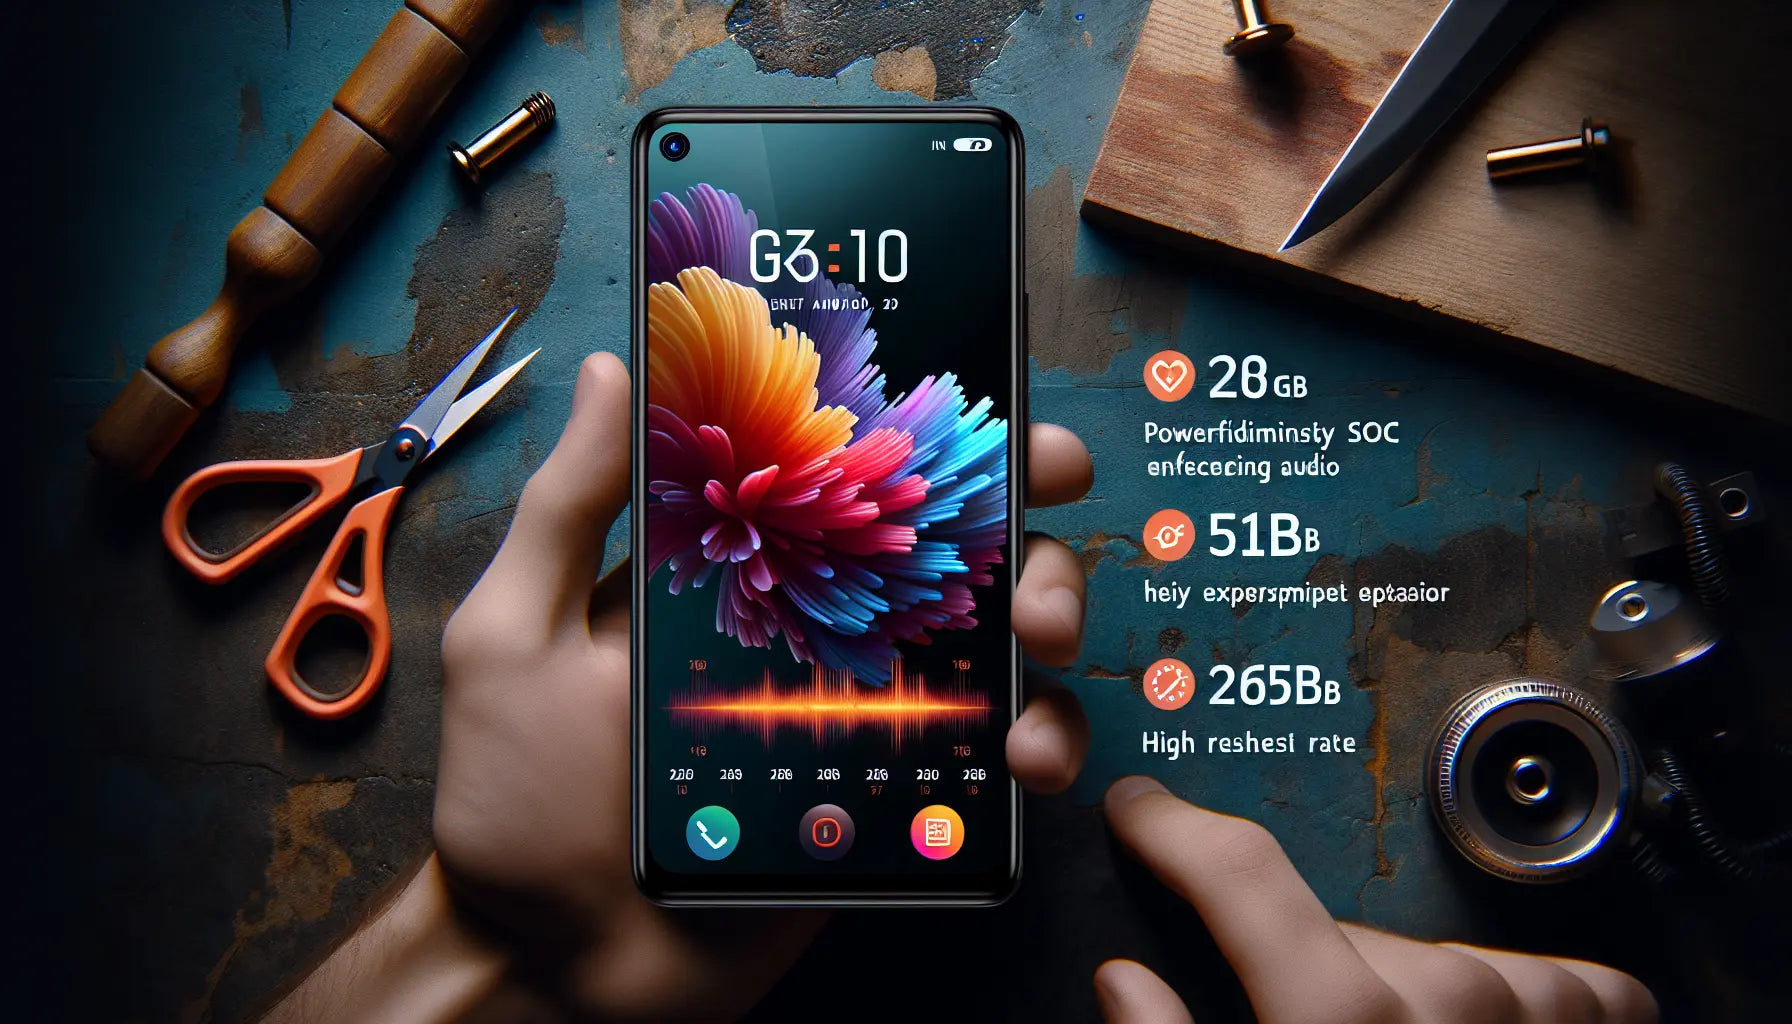 Infinix GT 20 Pro: New Flagship with Dimensity 8200 SoC